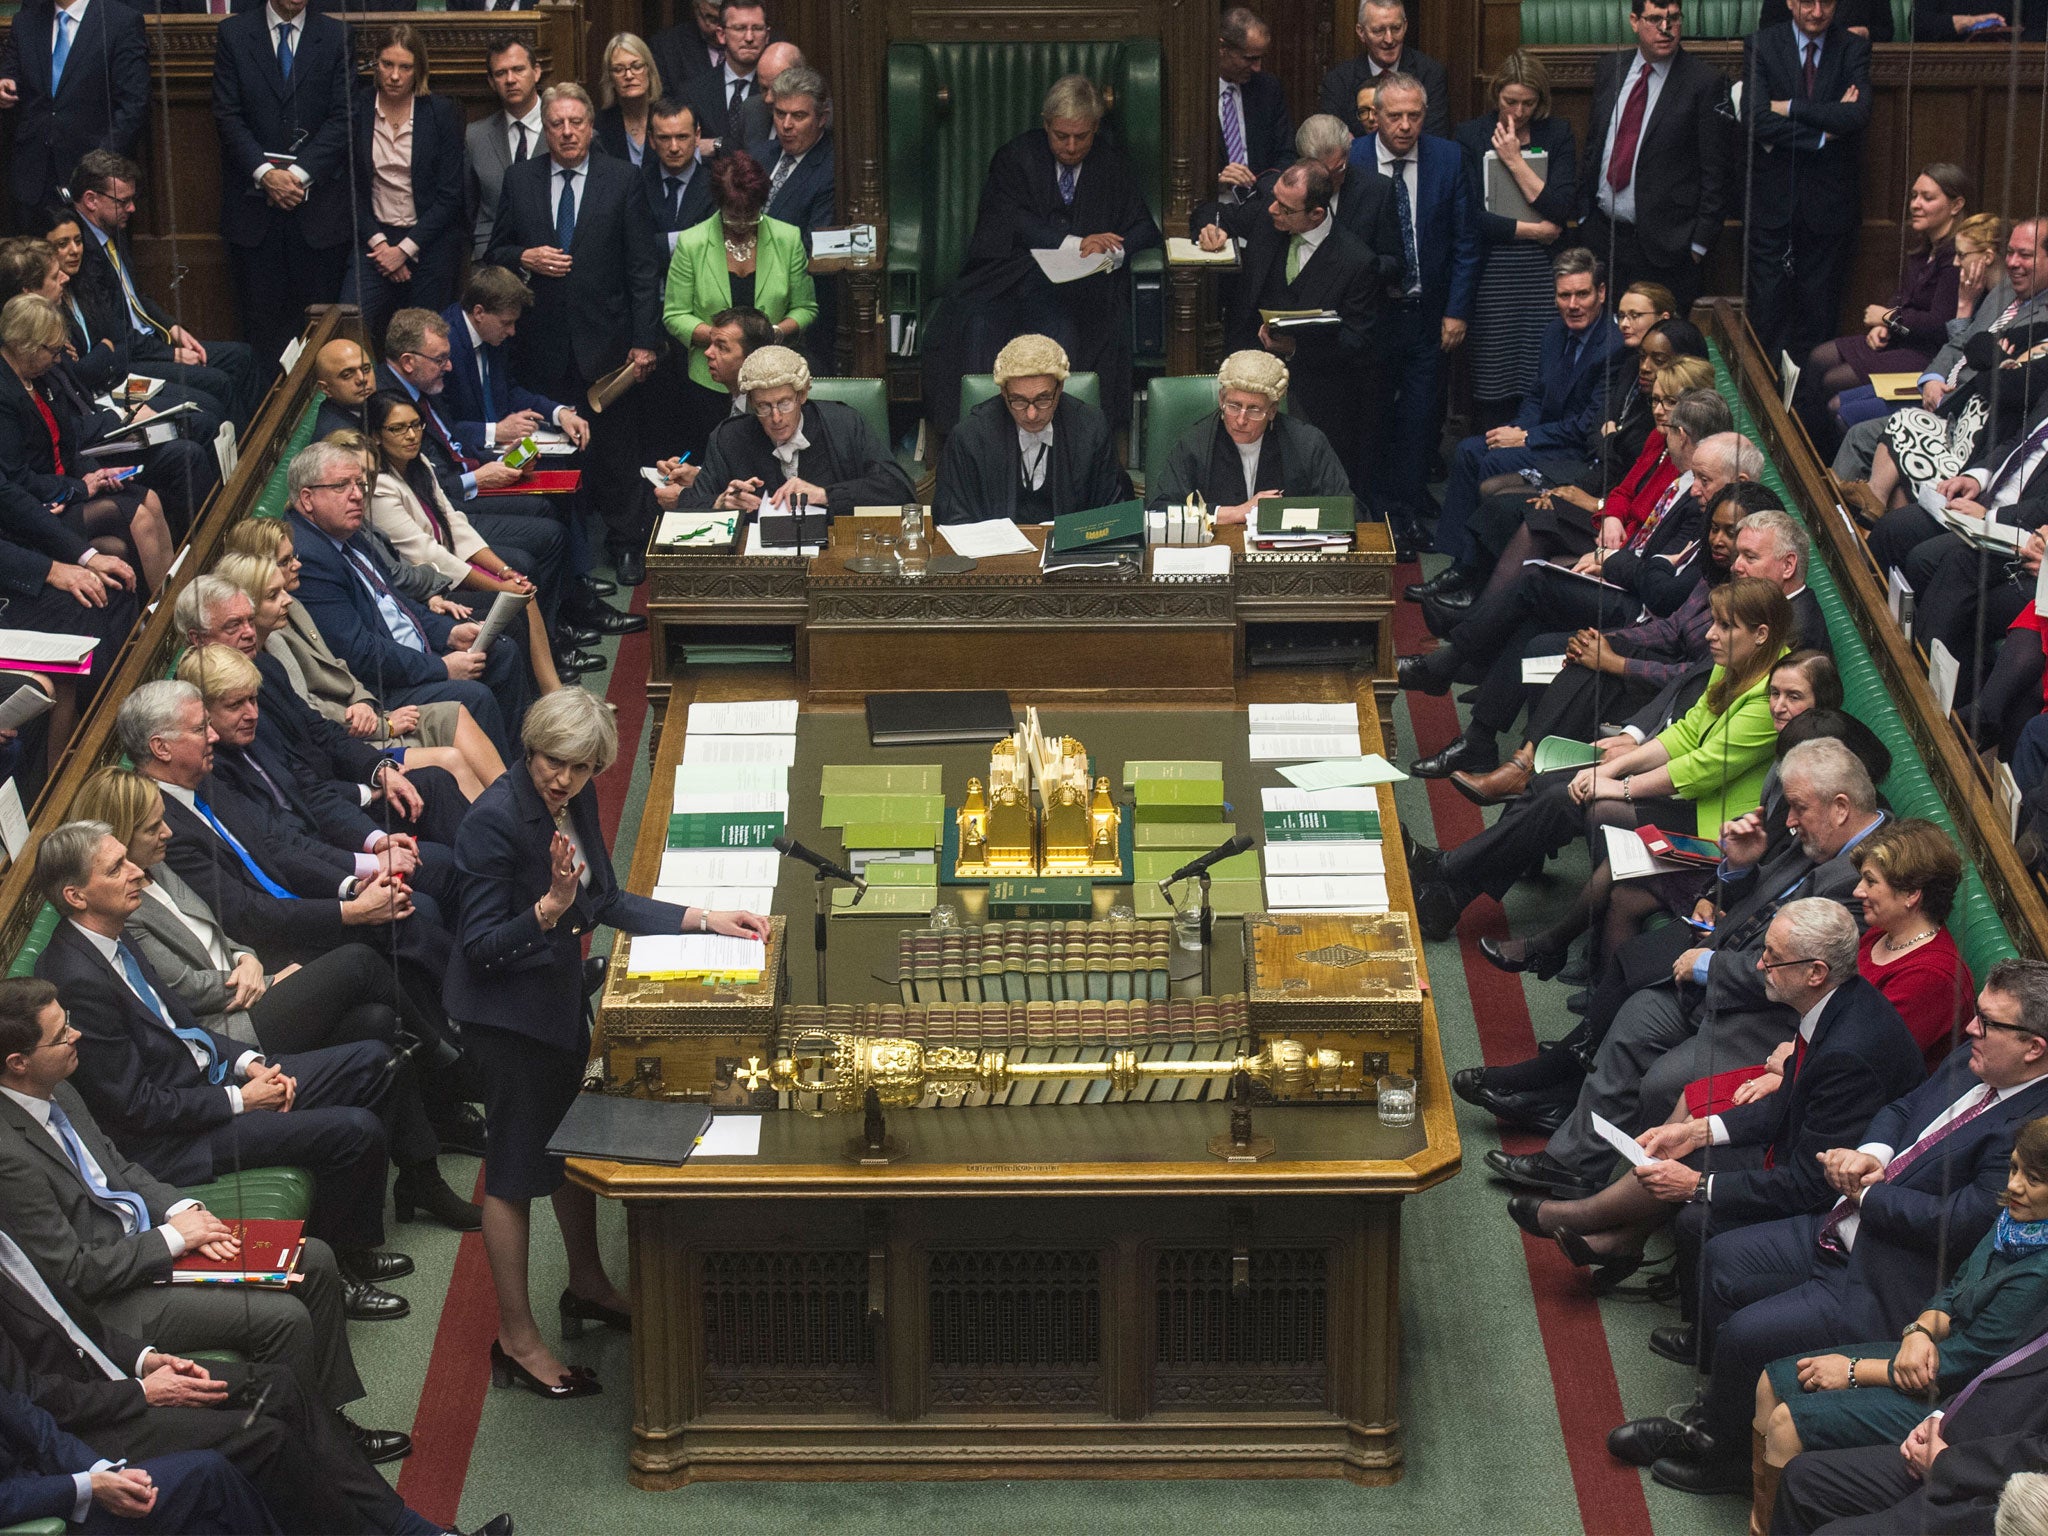 Prime Minister Theresa May speaking in the House of Commons